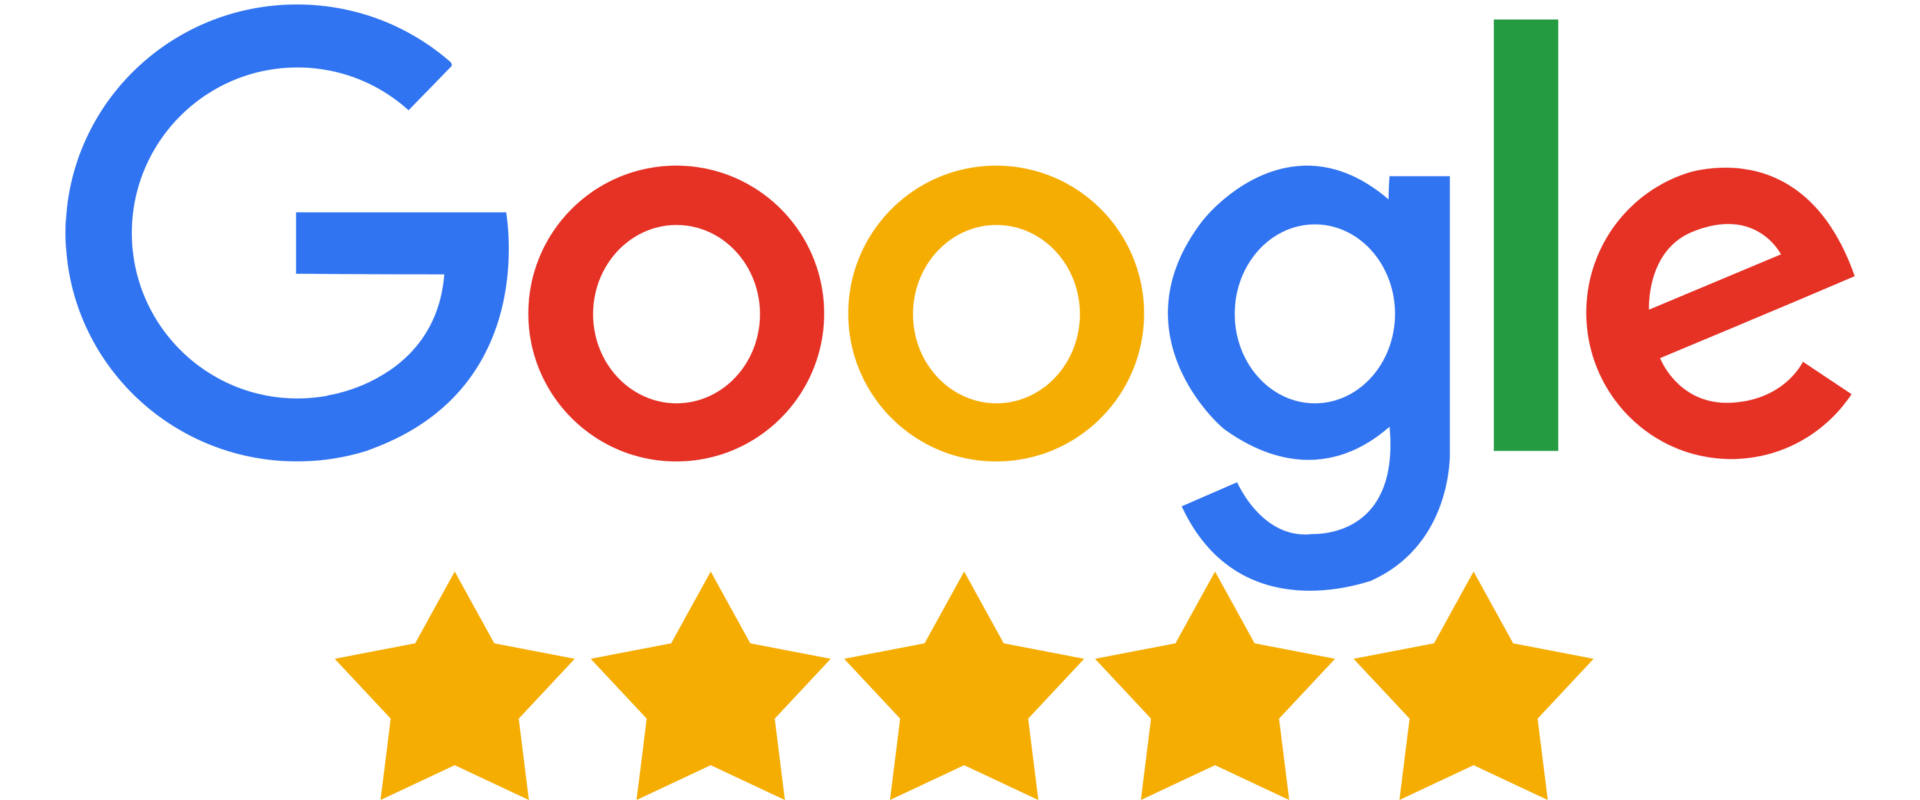 First Call Septic Tank Services is rated 5 stars in Google